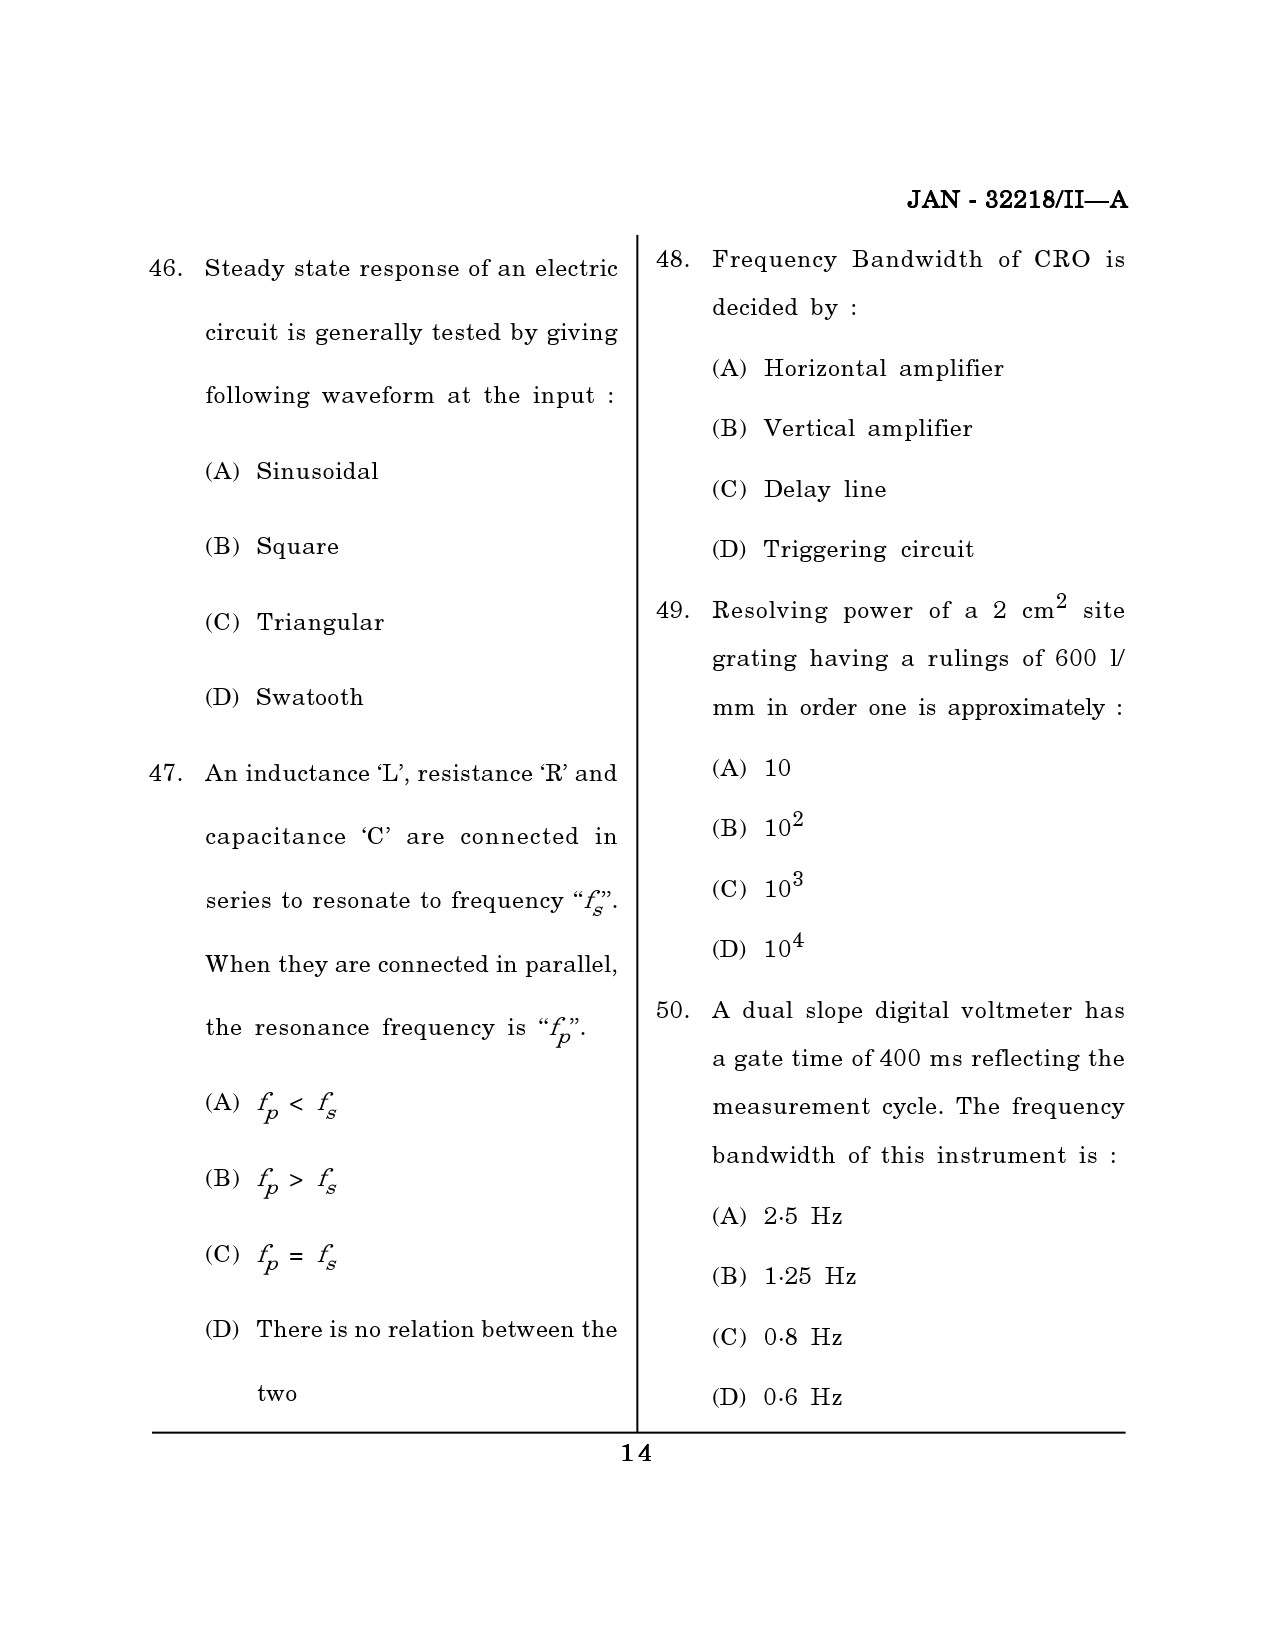 Maharashtra SET Physical Science Question Paper II January 2018 13